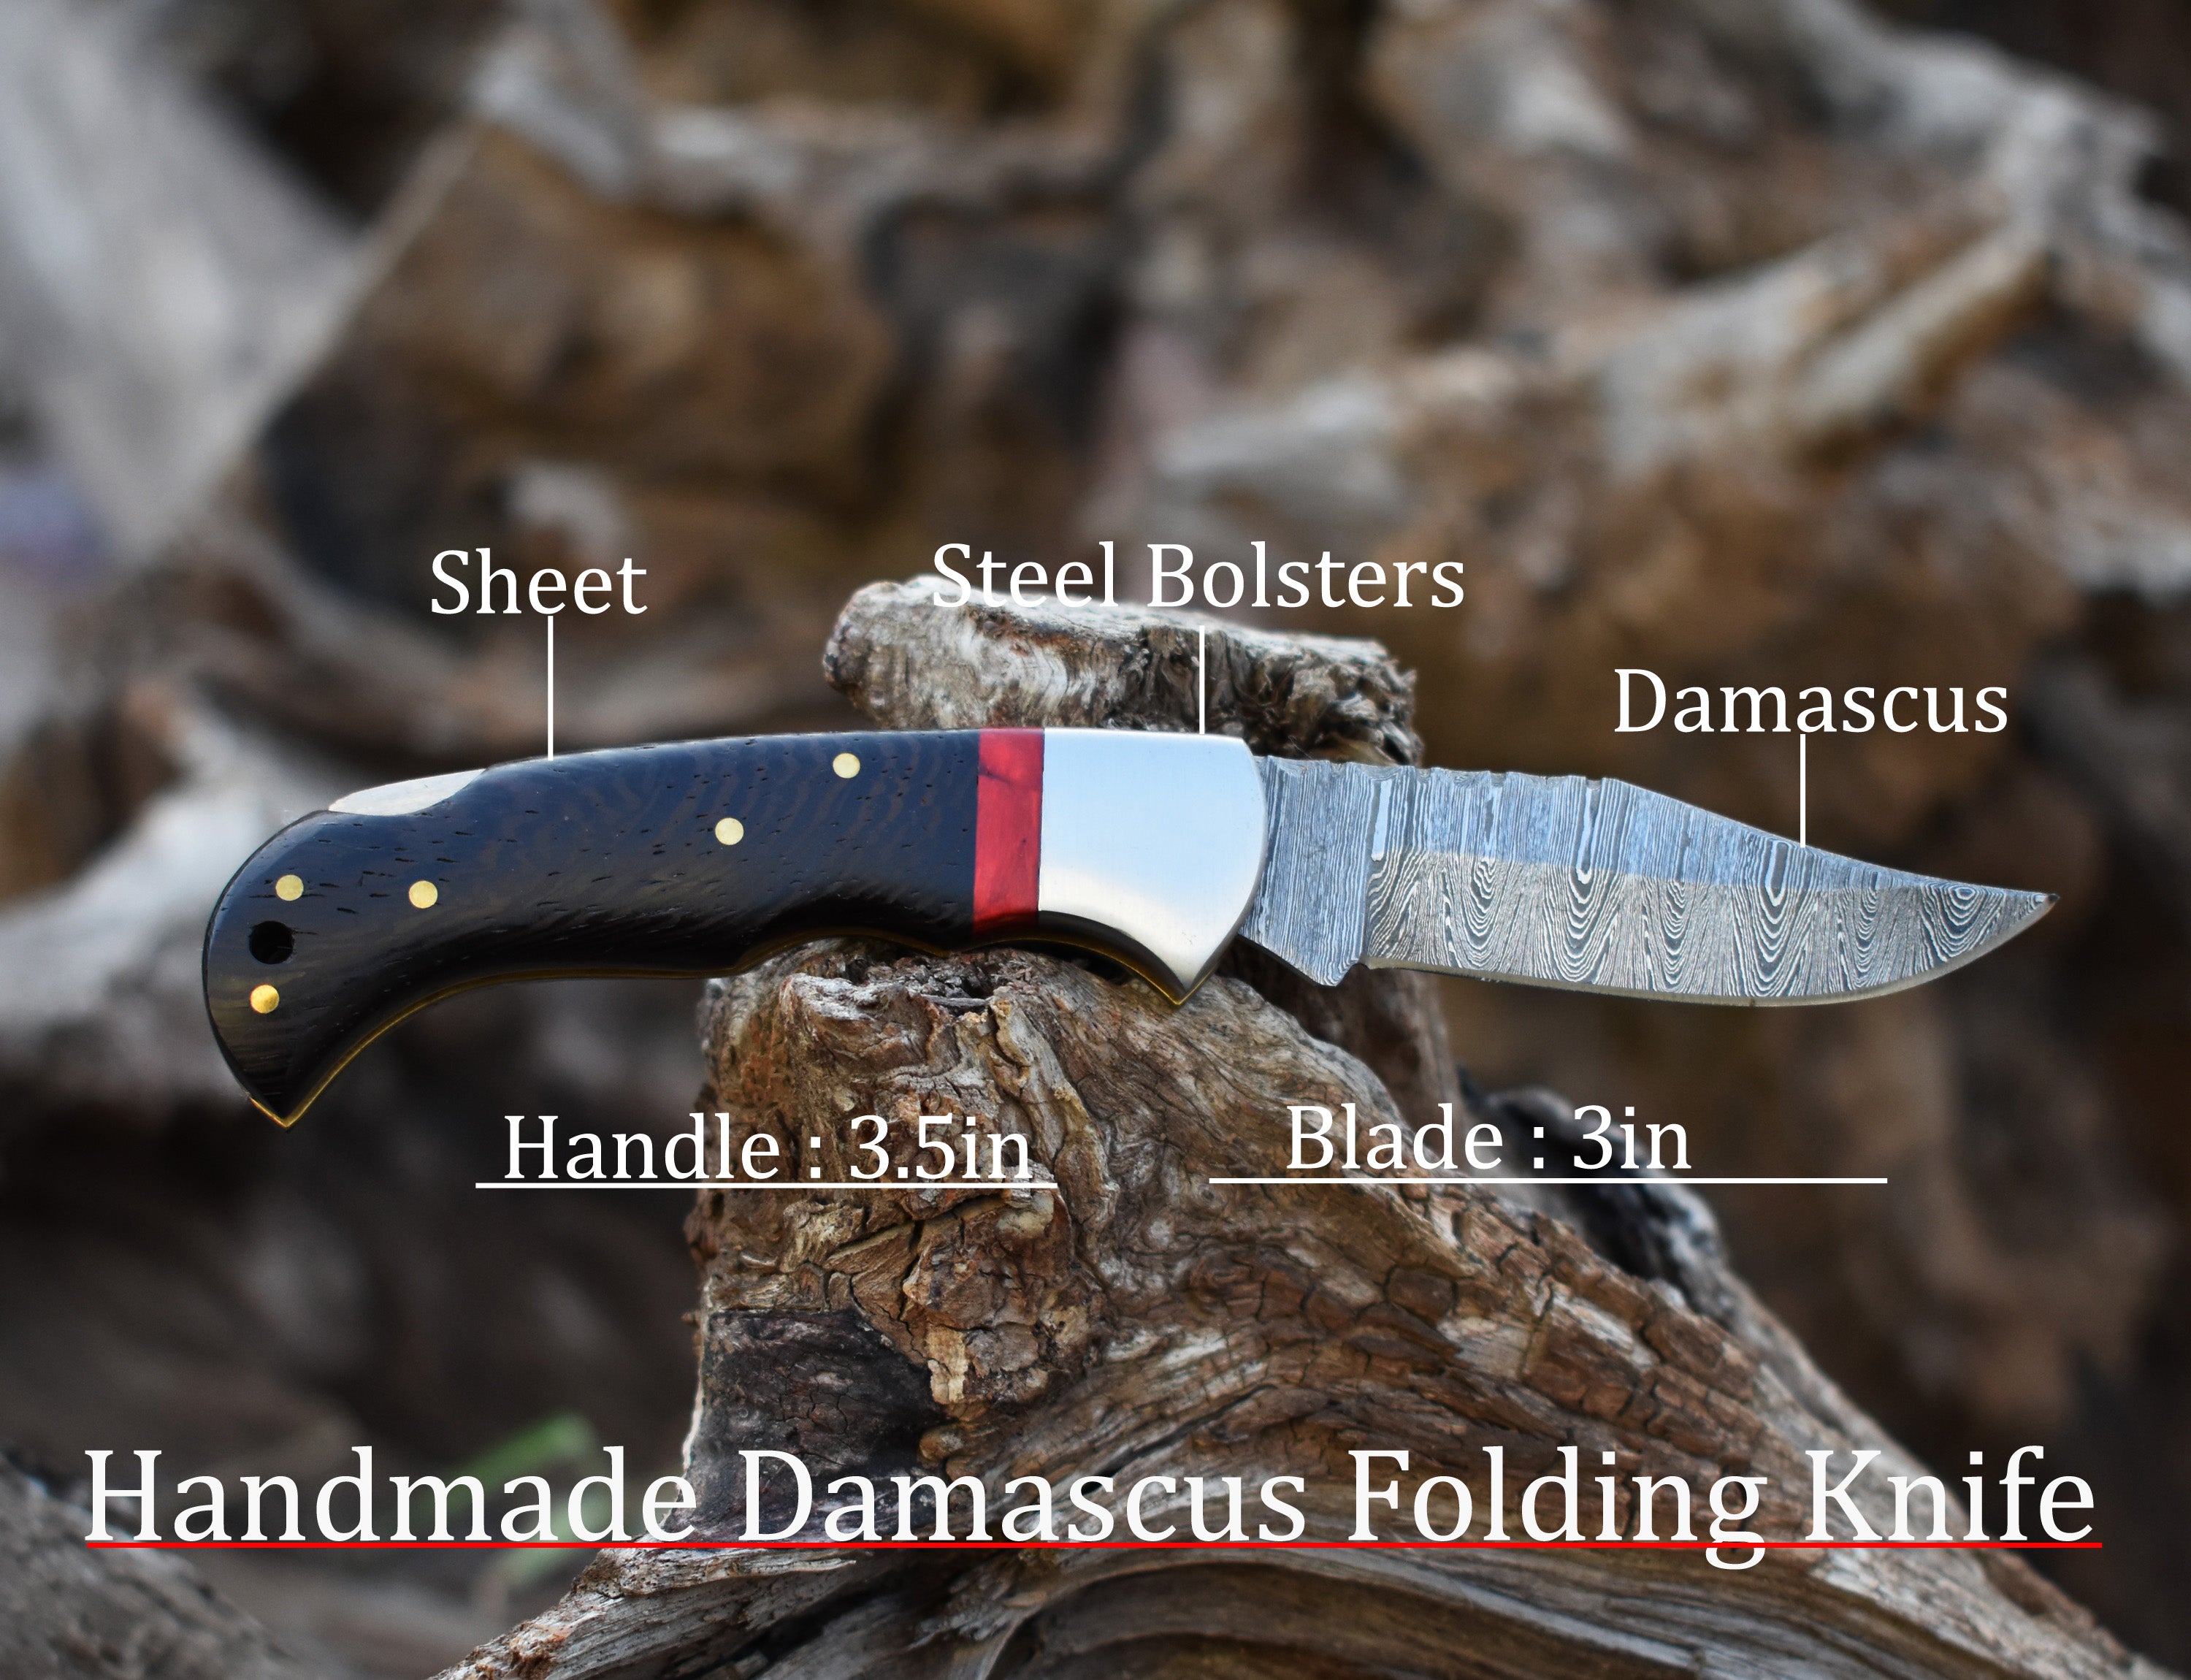 6.5" Handmade Damascus Steel Folding Knife Wangi wood Handle Back Lock Pocket Knife With Leather Pouch Personalized Gift for Men.